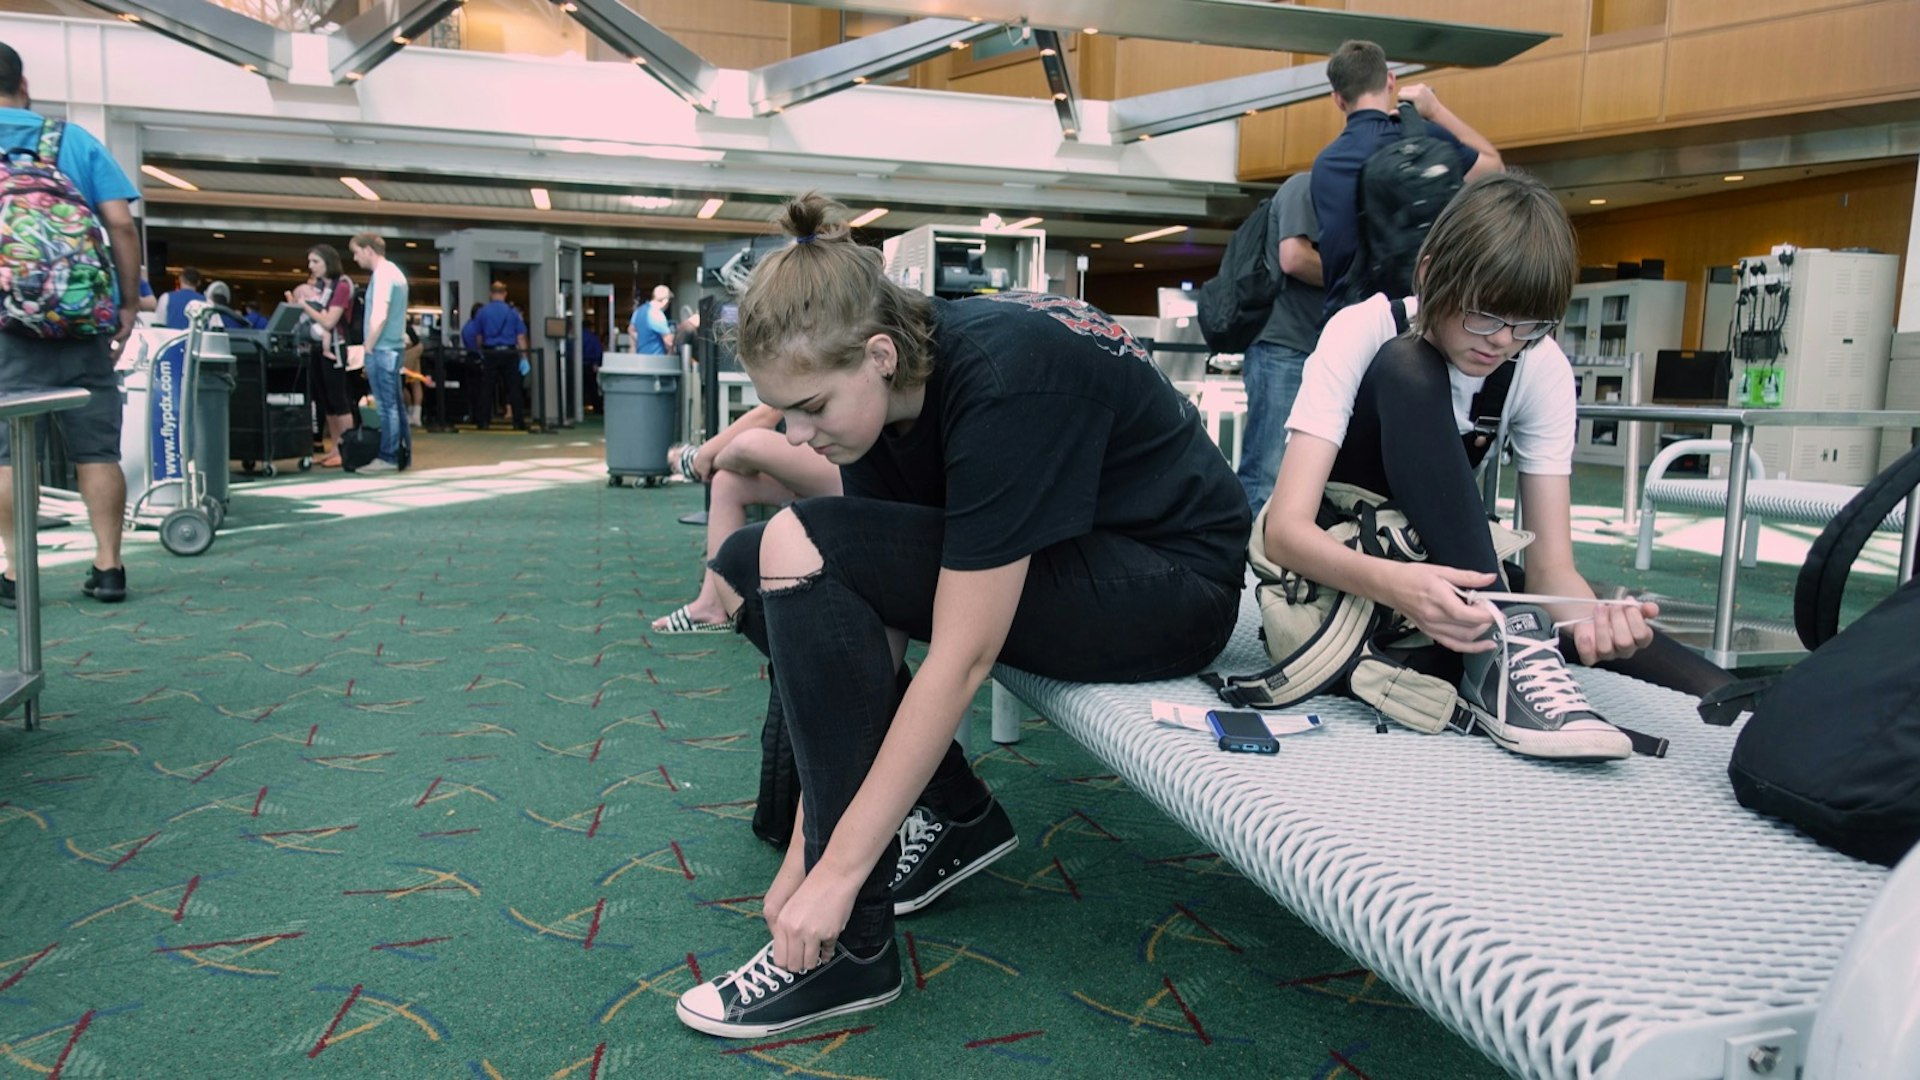 Travelers put their shoes back on after clearing airport security at Portland's PDX